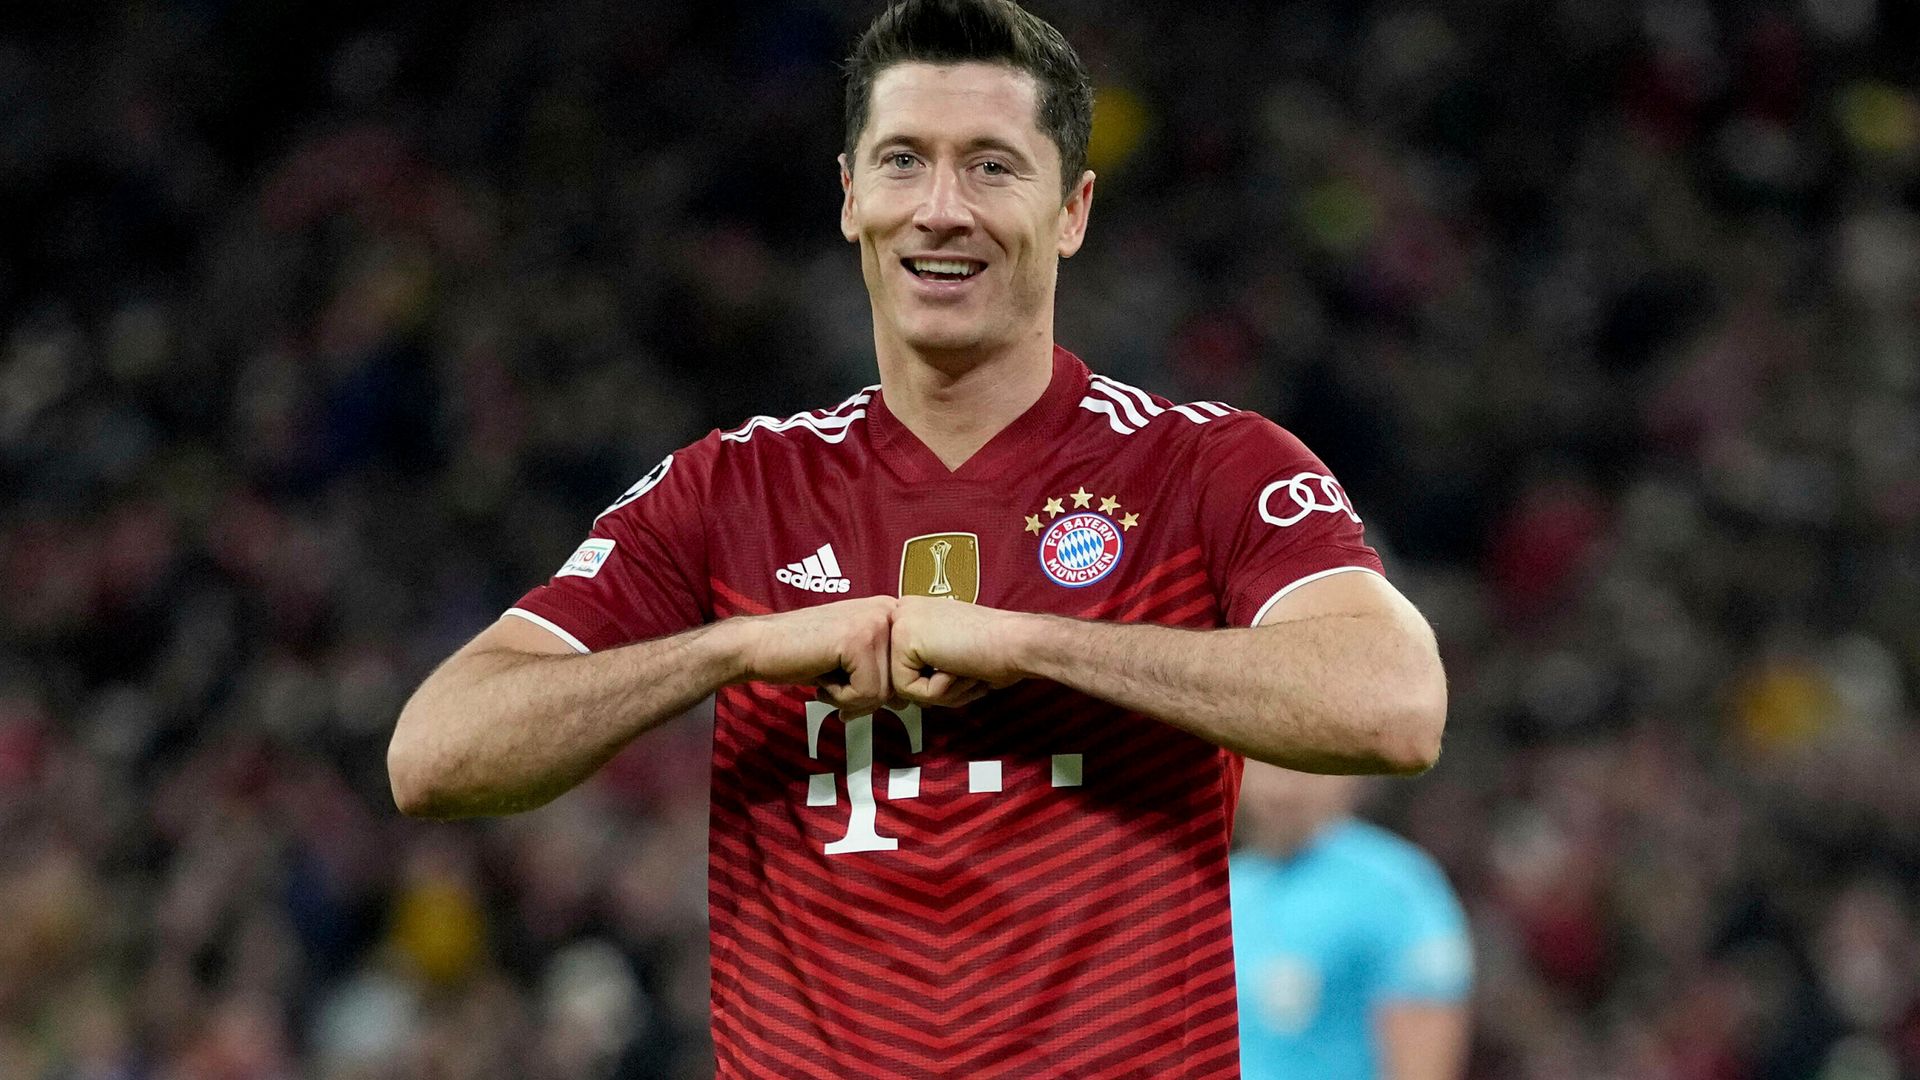 Champions League: Bayern, Juve qualify for last 16